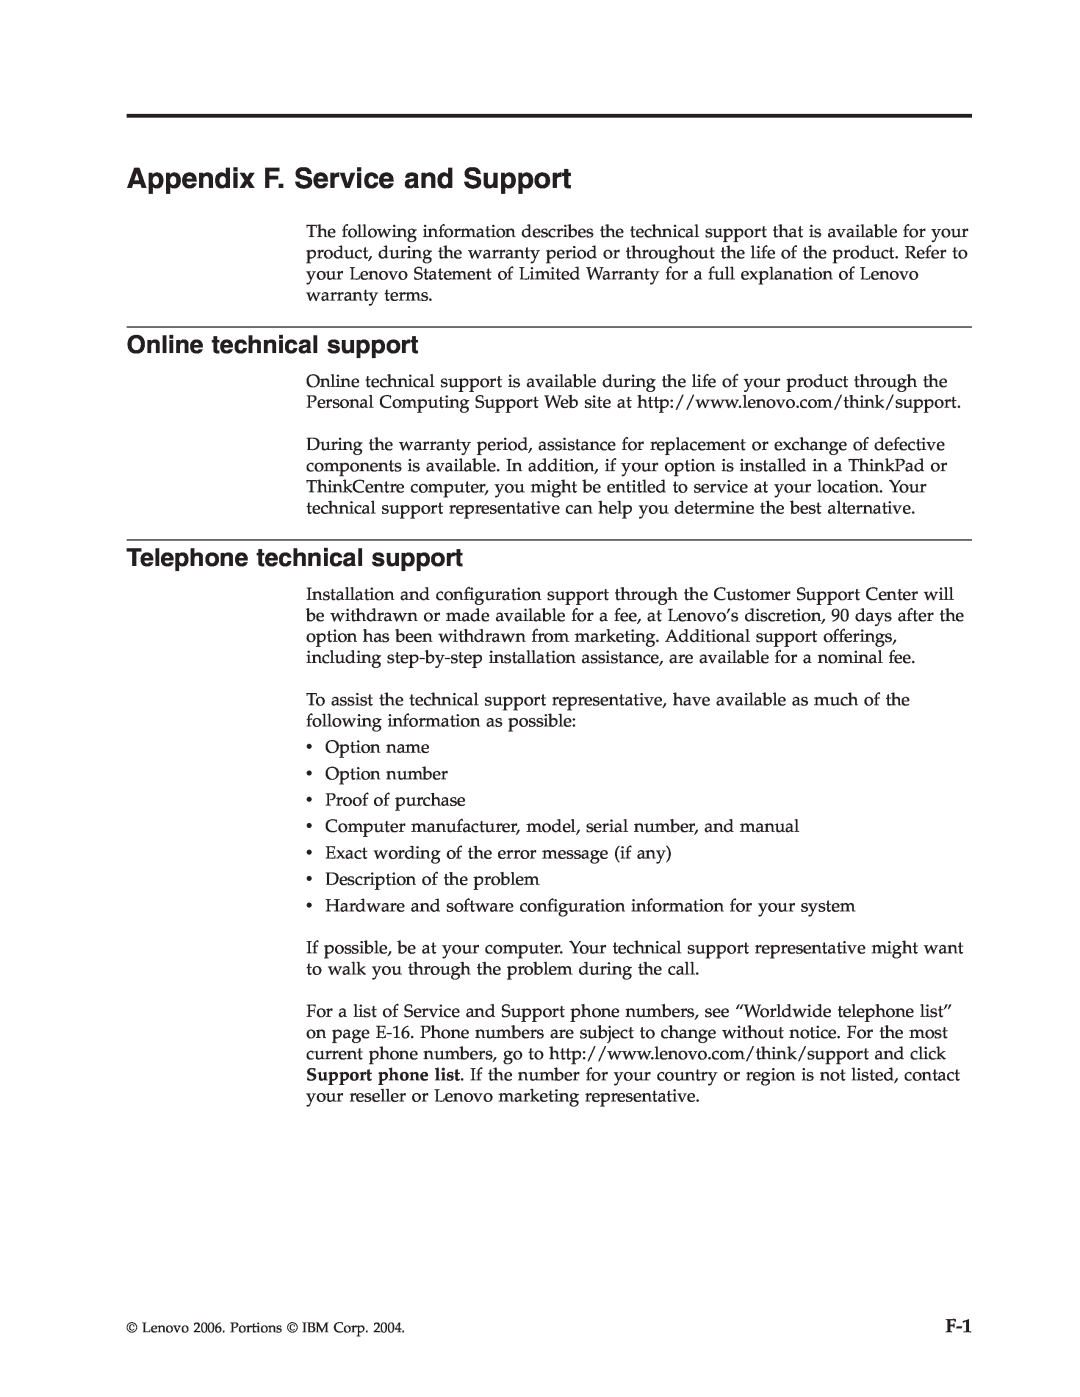 Lenovo 41N5624 manual Appendix F. Service and Support, Online technical support, Telephone technical support 